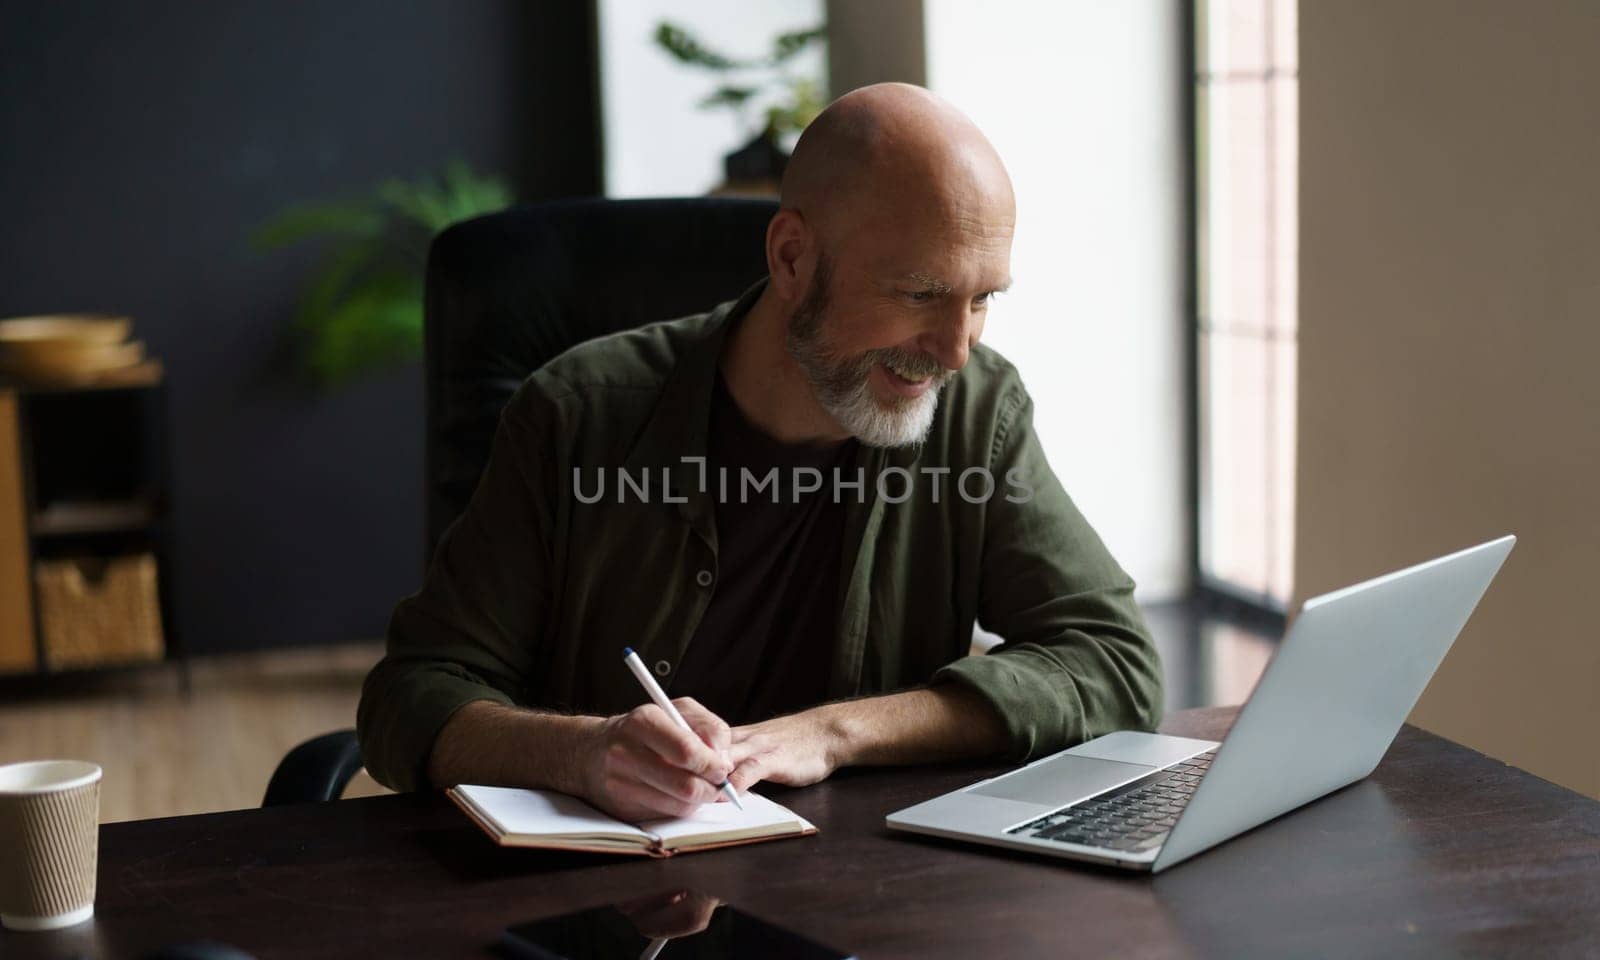 Smiling mid-aged man focused and productive state. He seated at desk indoors, engrossed work. With notepad in front, he diligently writing down notes, while simultaneously looking at computer screen. by LipikStockMedia